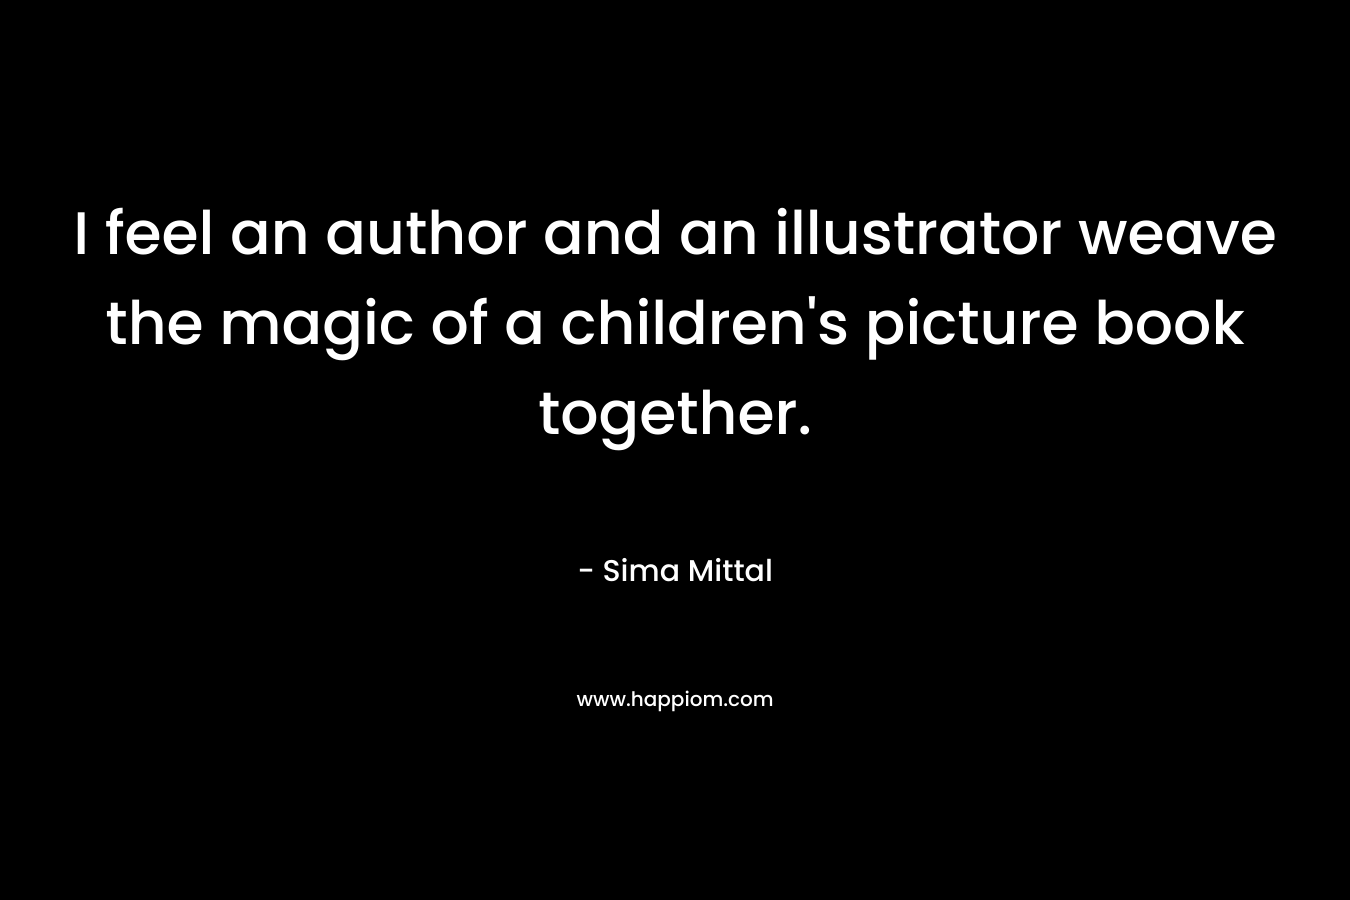 I feel an author and an illustrator weave the magic of a children's picture book together.